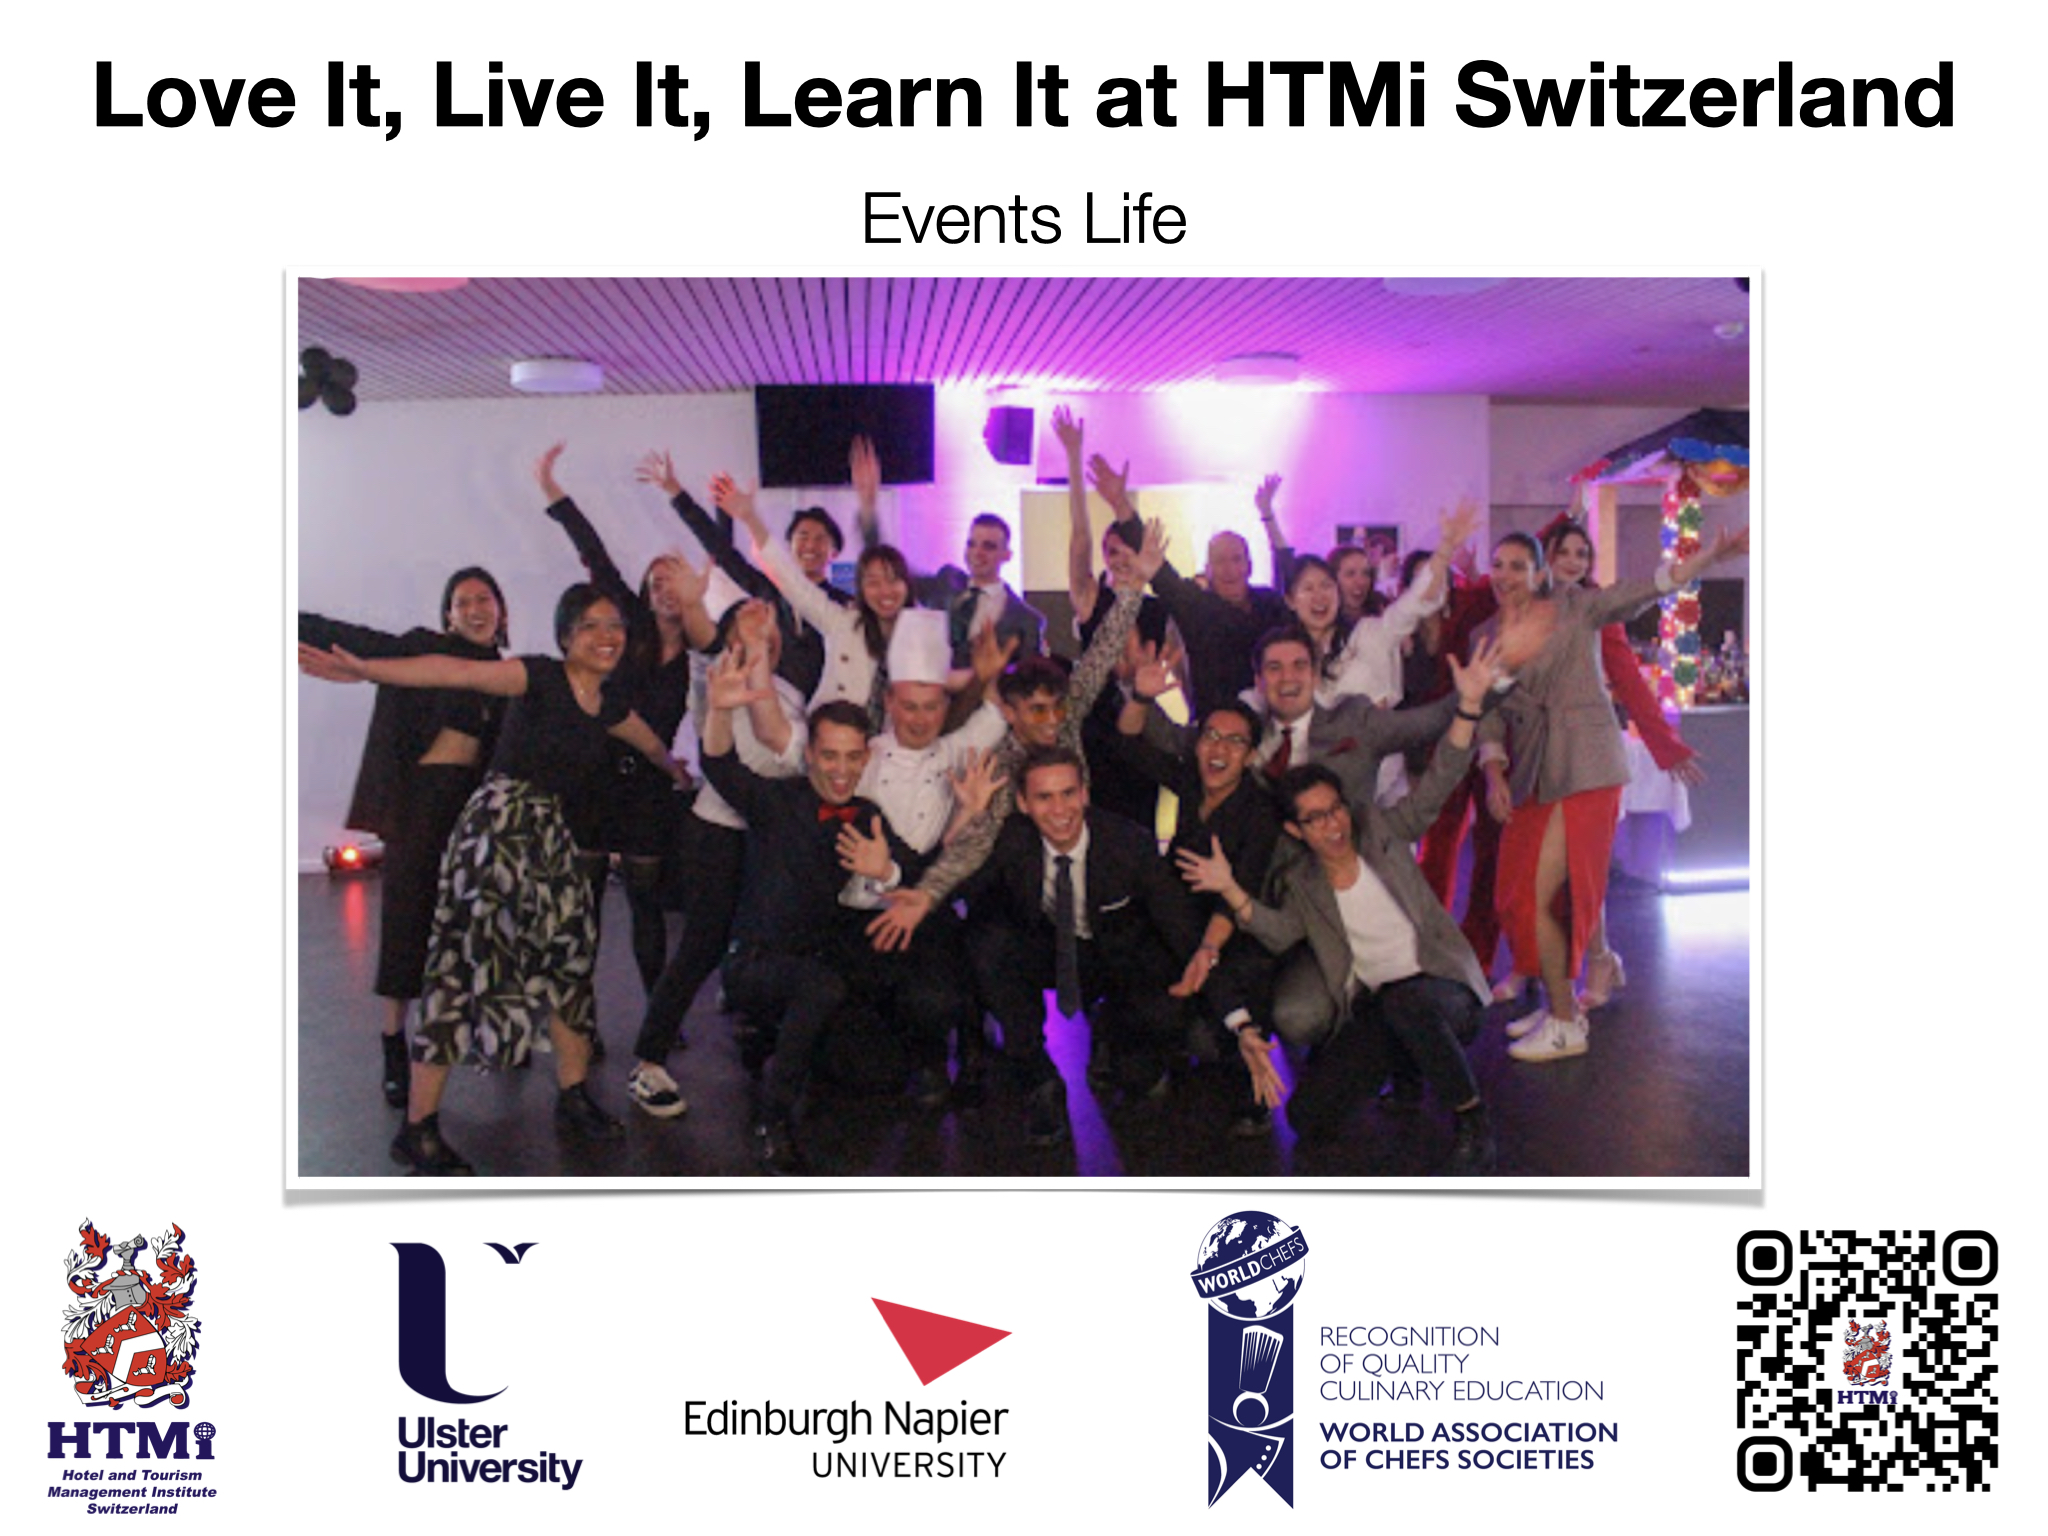 Events Life – Love It, Live It, Learn It at HTMi Switzerland